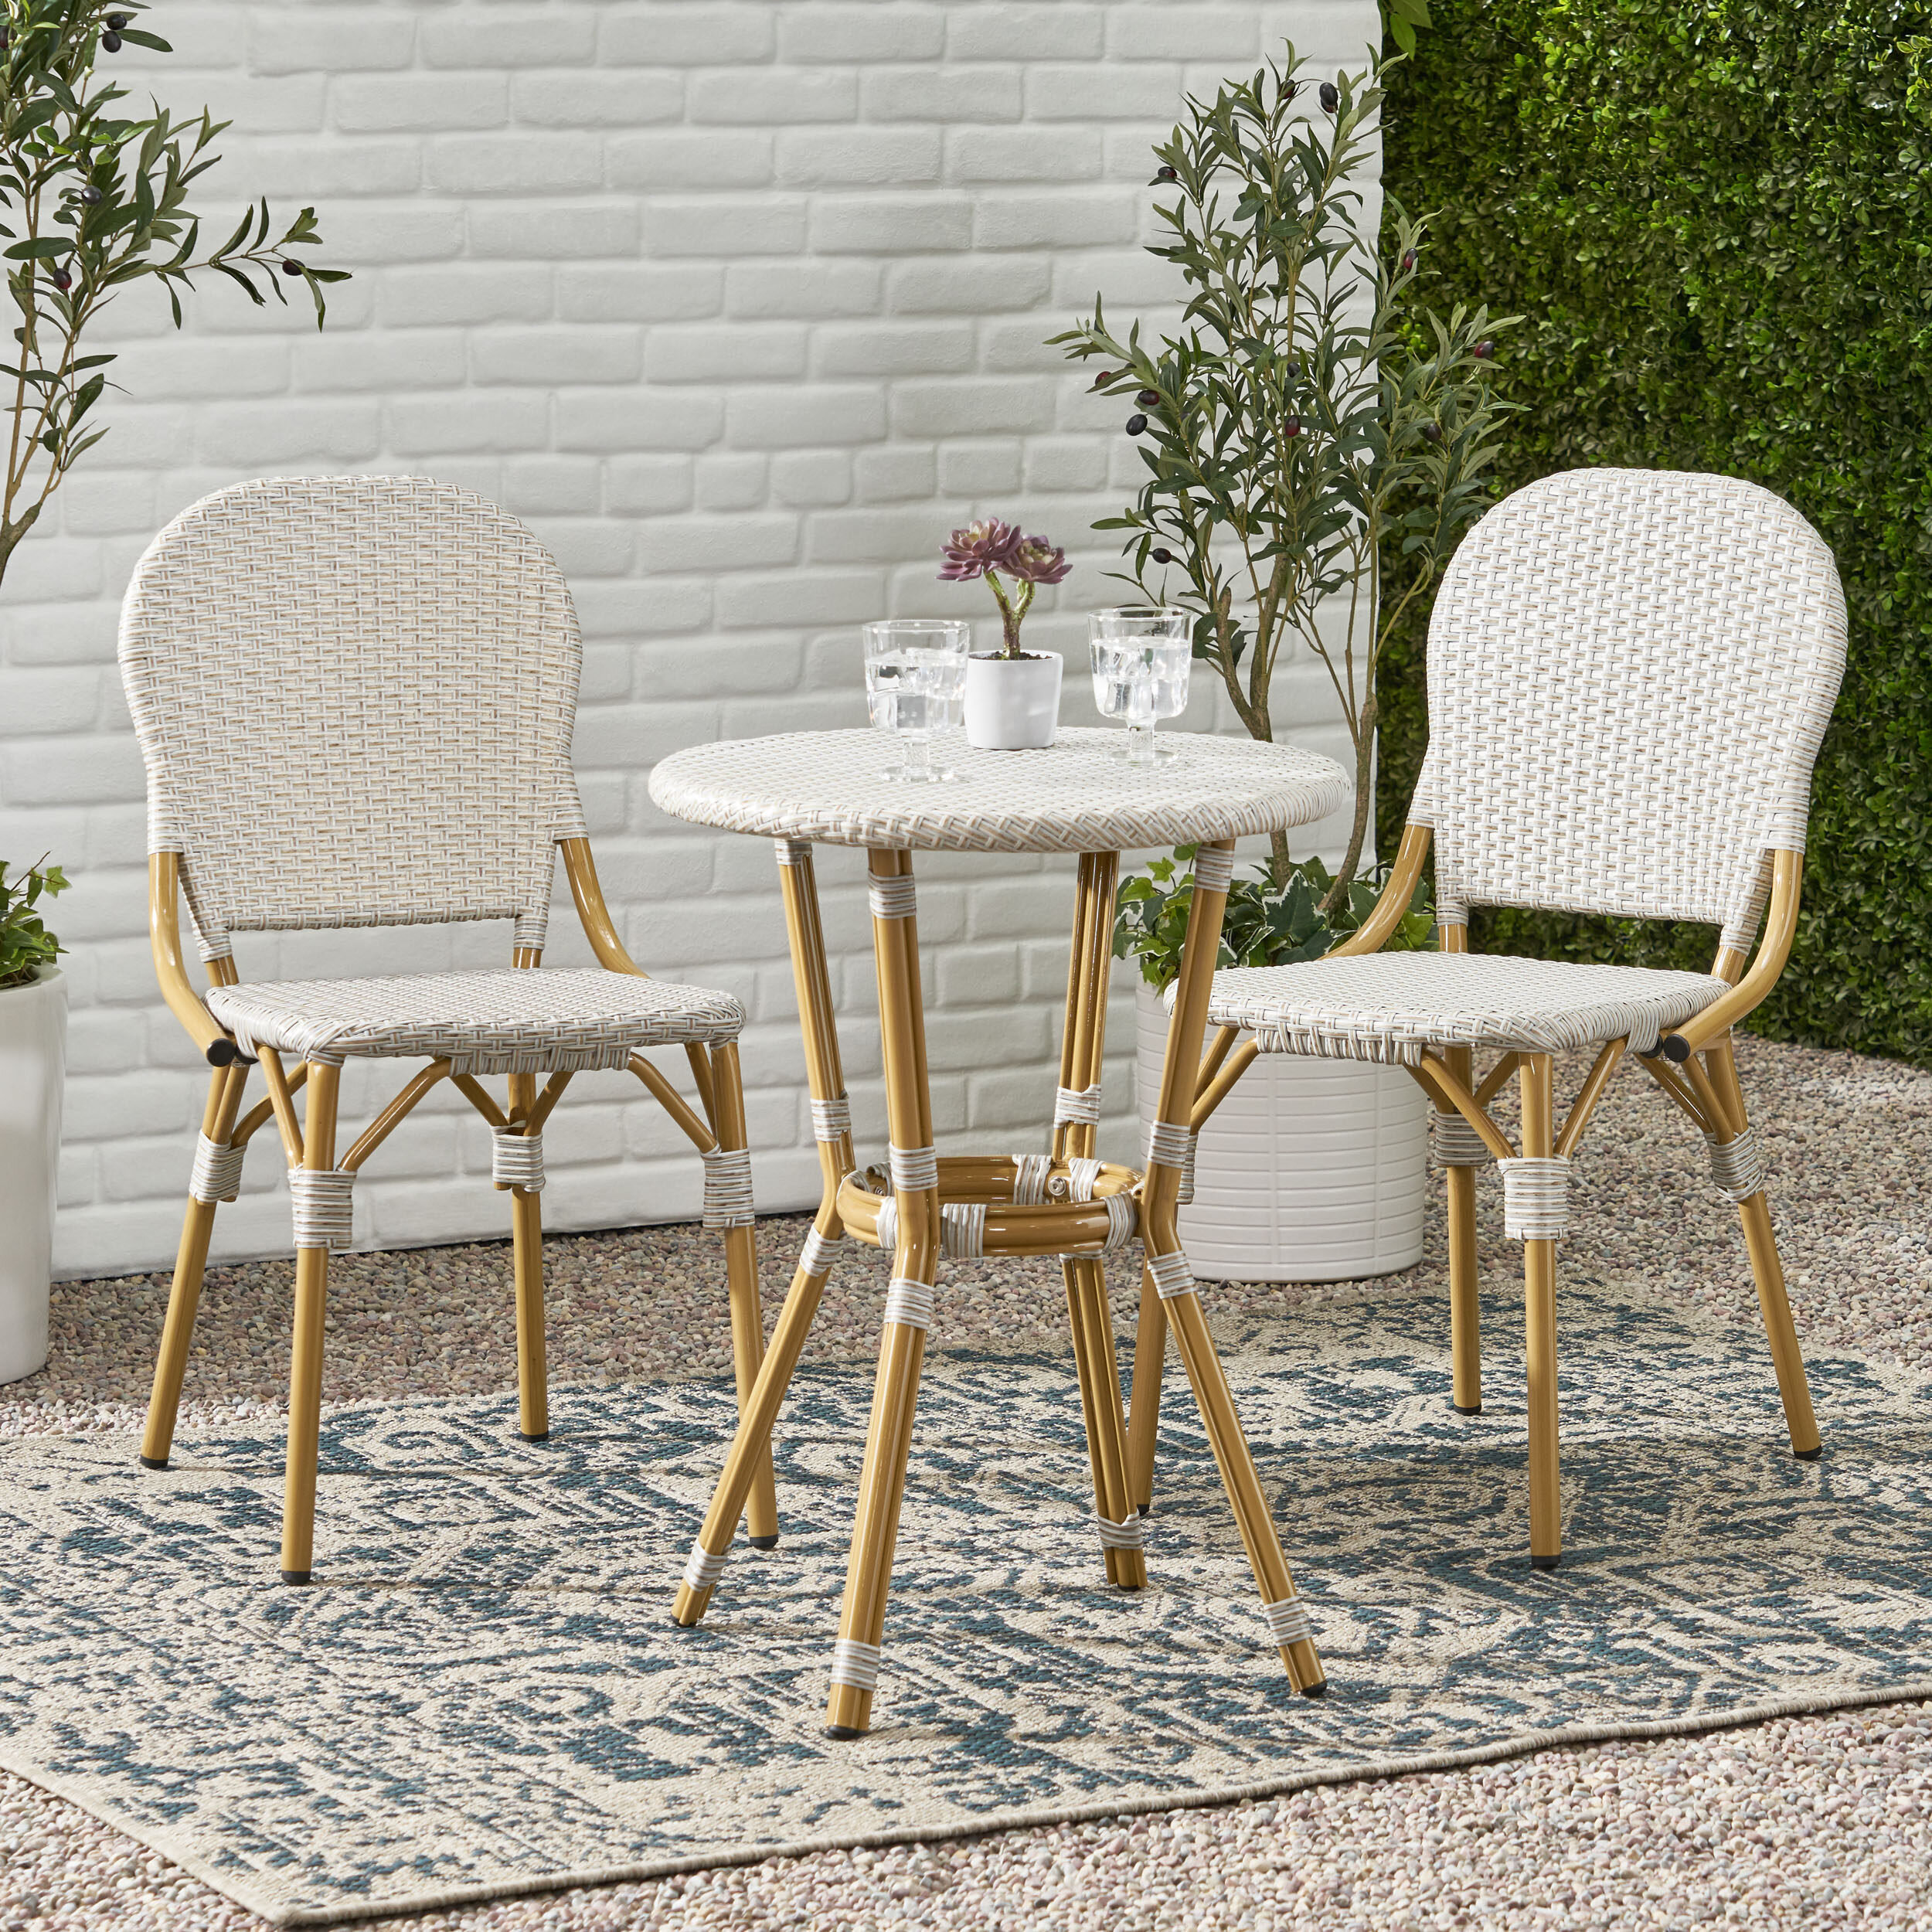 Image of Wicker bistro patio set with round table and two wicker chairs